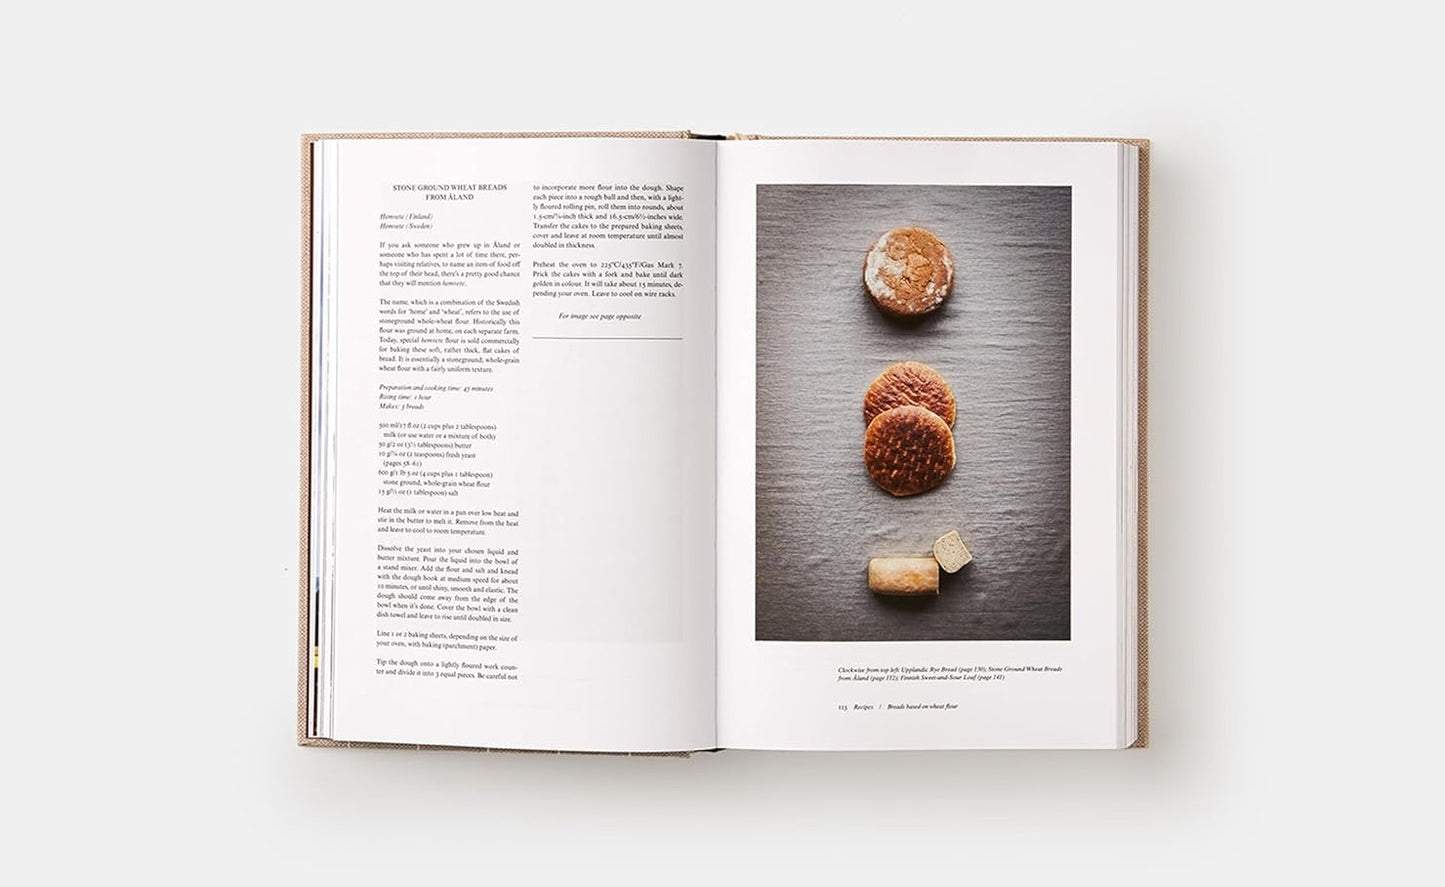 The Nordic Baking Book